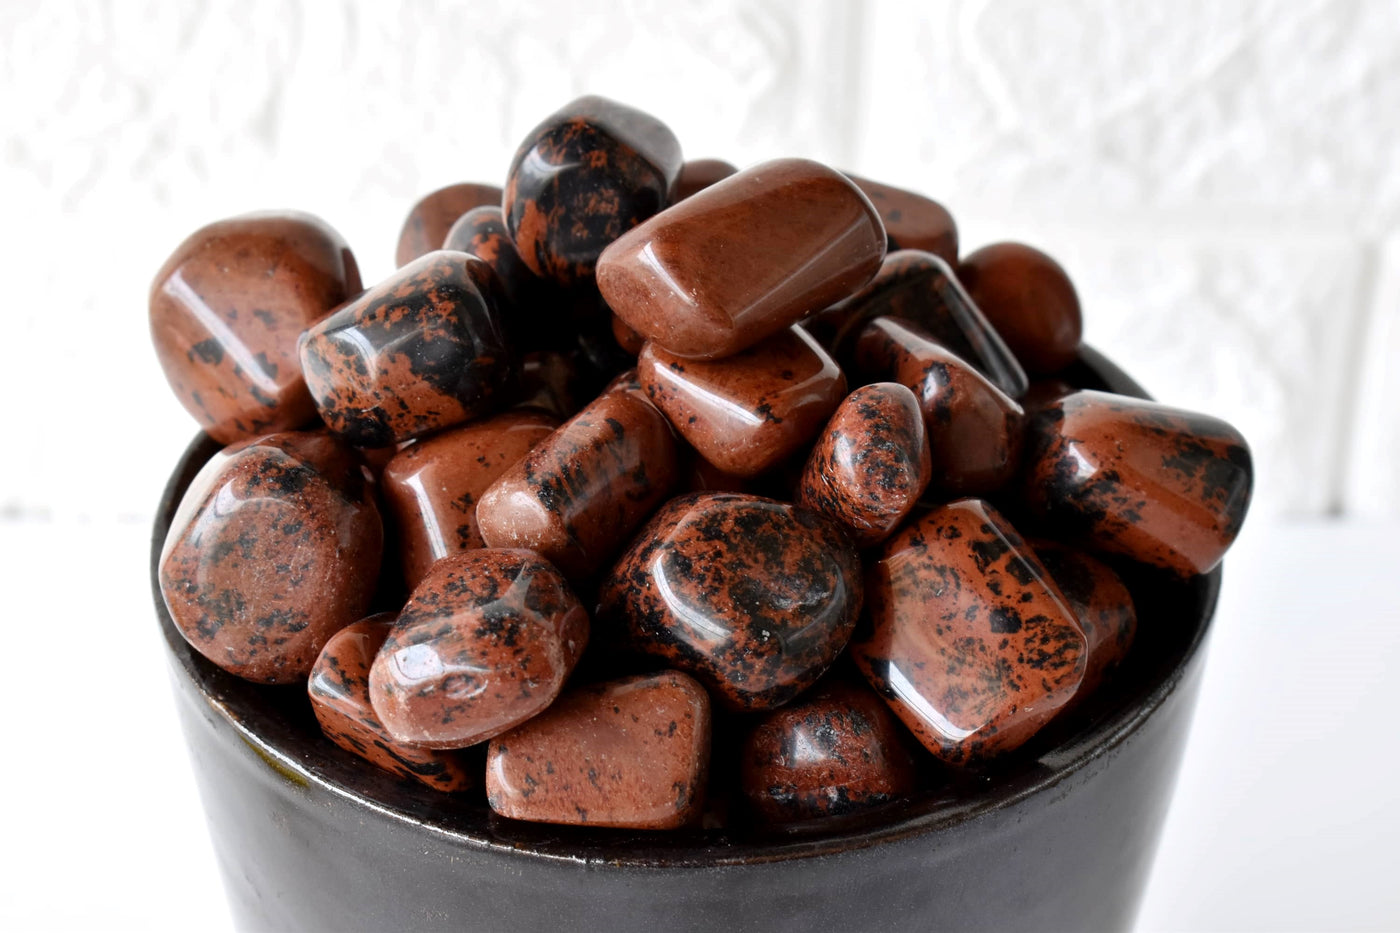 Mahogany Obsidian Tumbled Crystals (Sexuality and Gentle Self-Expression)